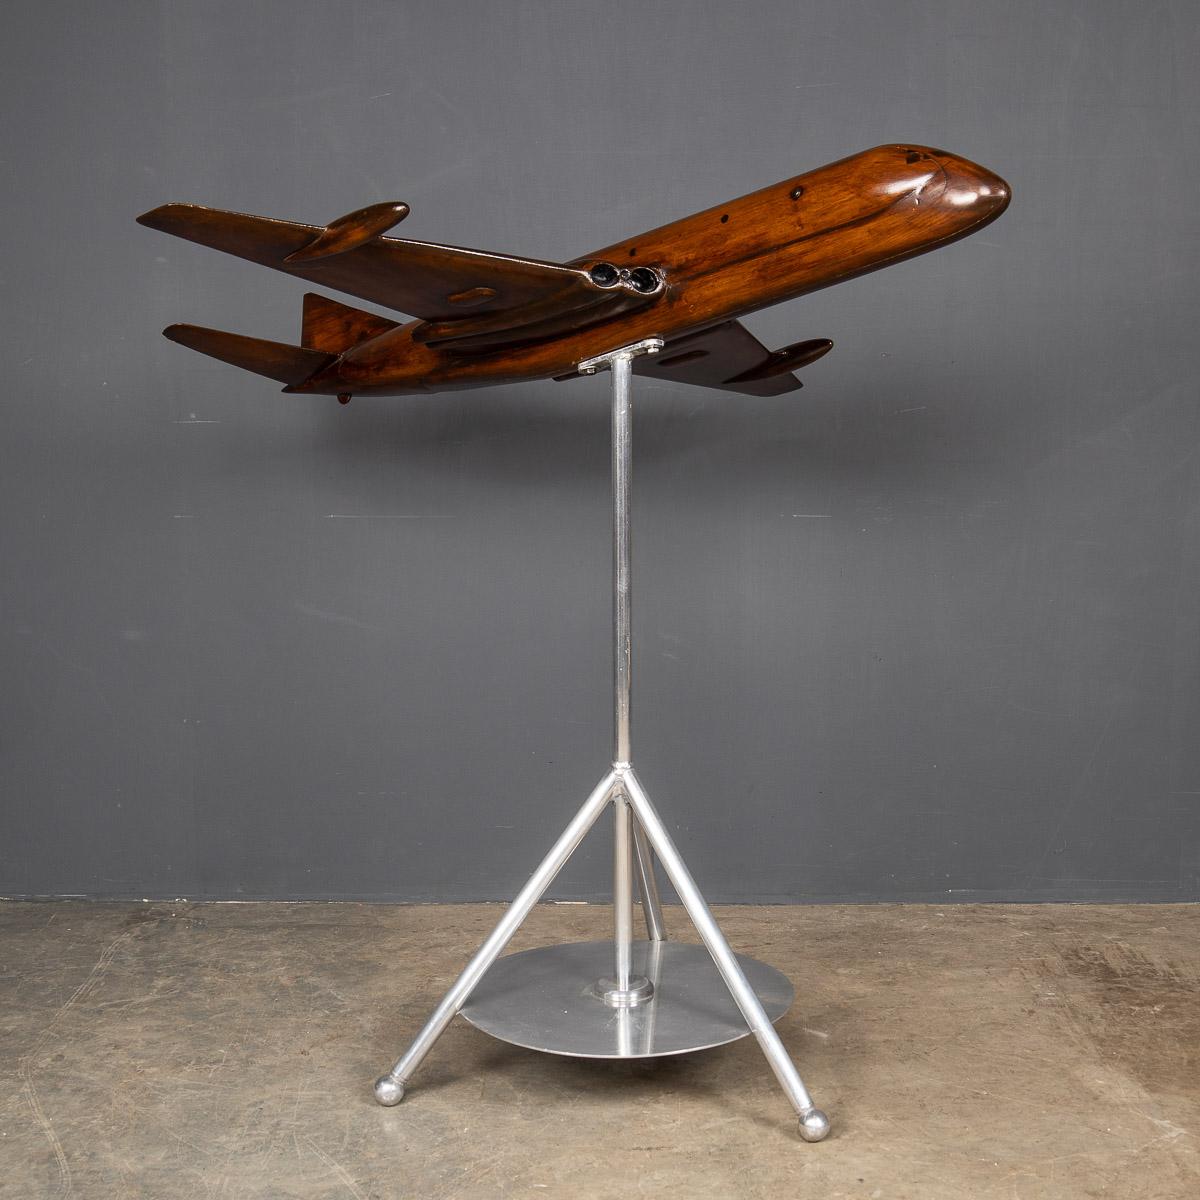 A Stunning mid-20th Century large model of the Hawker Siddeley Nimrod made in the late sixties, model on a metal stand. This item makes for a fantastic conversation piece, suitable for any interior, both modern or traditional.

Condition
In great